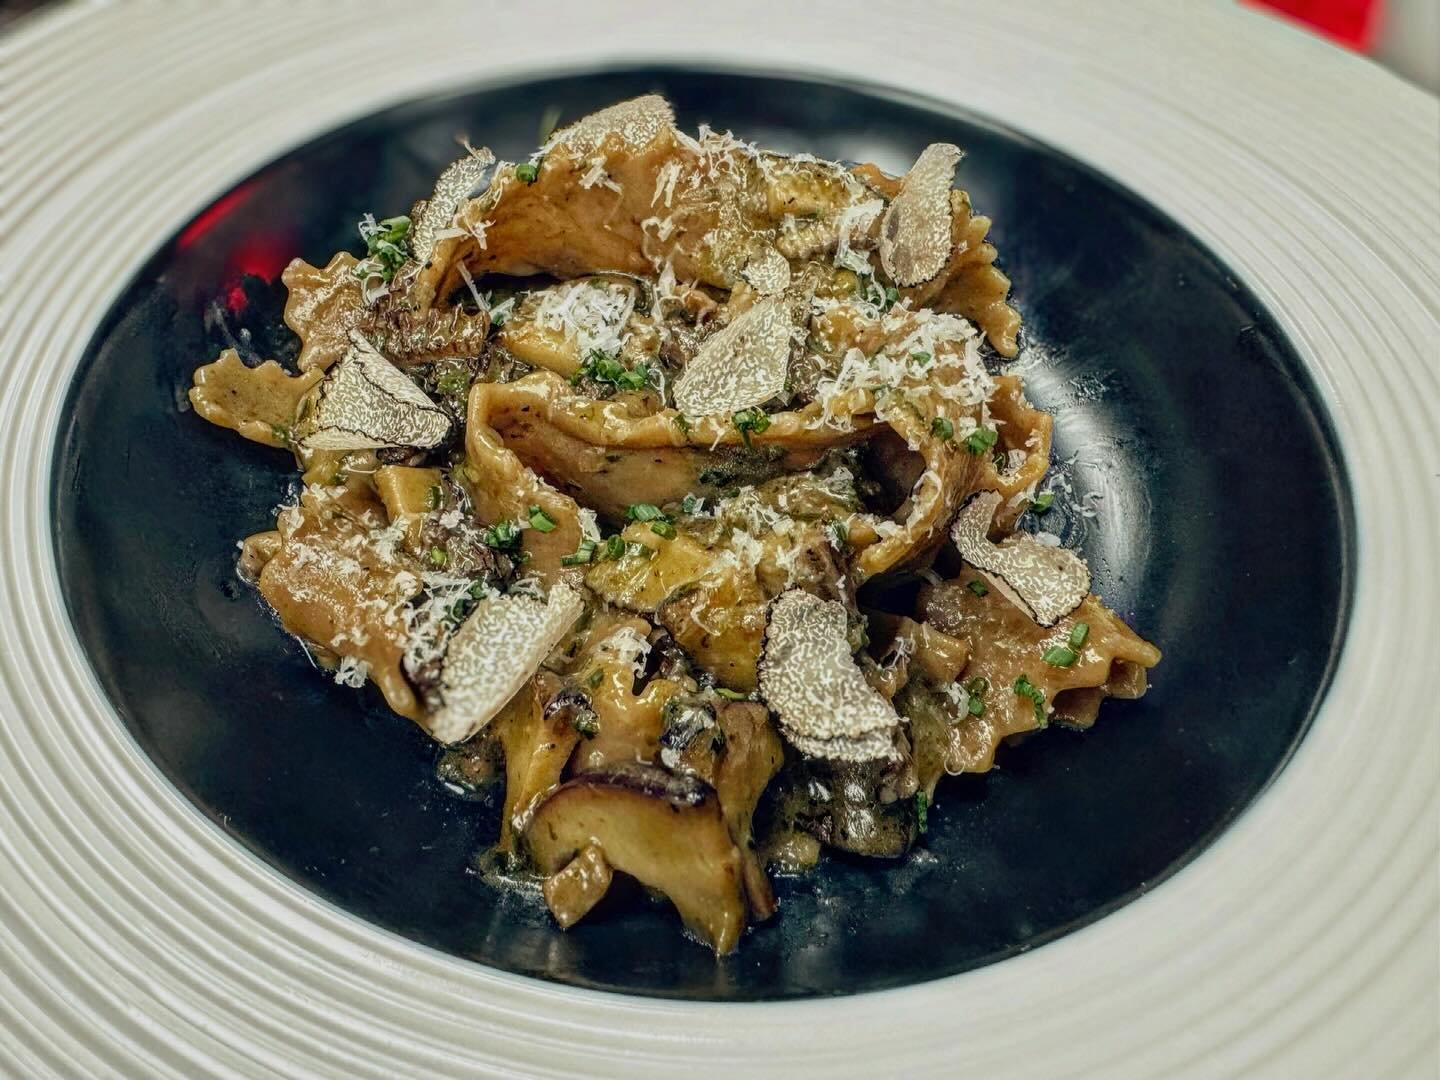 Our new main course has arrived.

🥩 Pappardelle, Ramps Butter, Fava Bean, Morels, Duck Confit
🌱 Pappardelle, Morels, Fava Beans, Pecorino Romano, Ramps Butter, Summer Truffles

Pictured: 🌱 

#nyc #finedining #michelin #goodyear